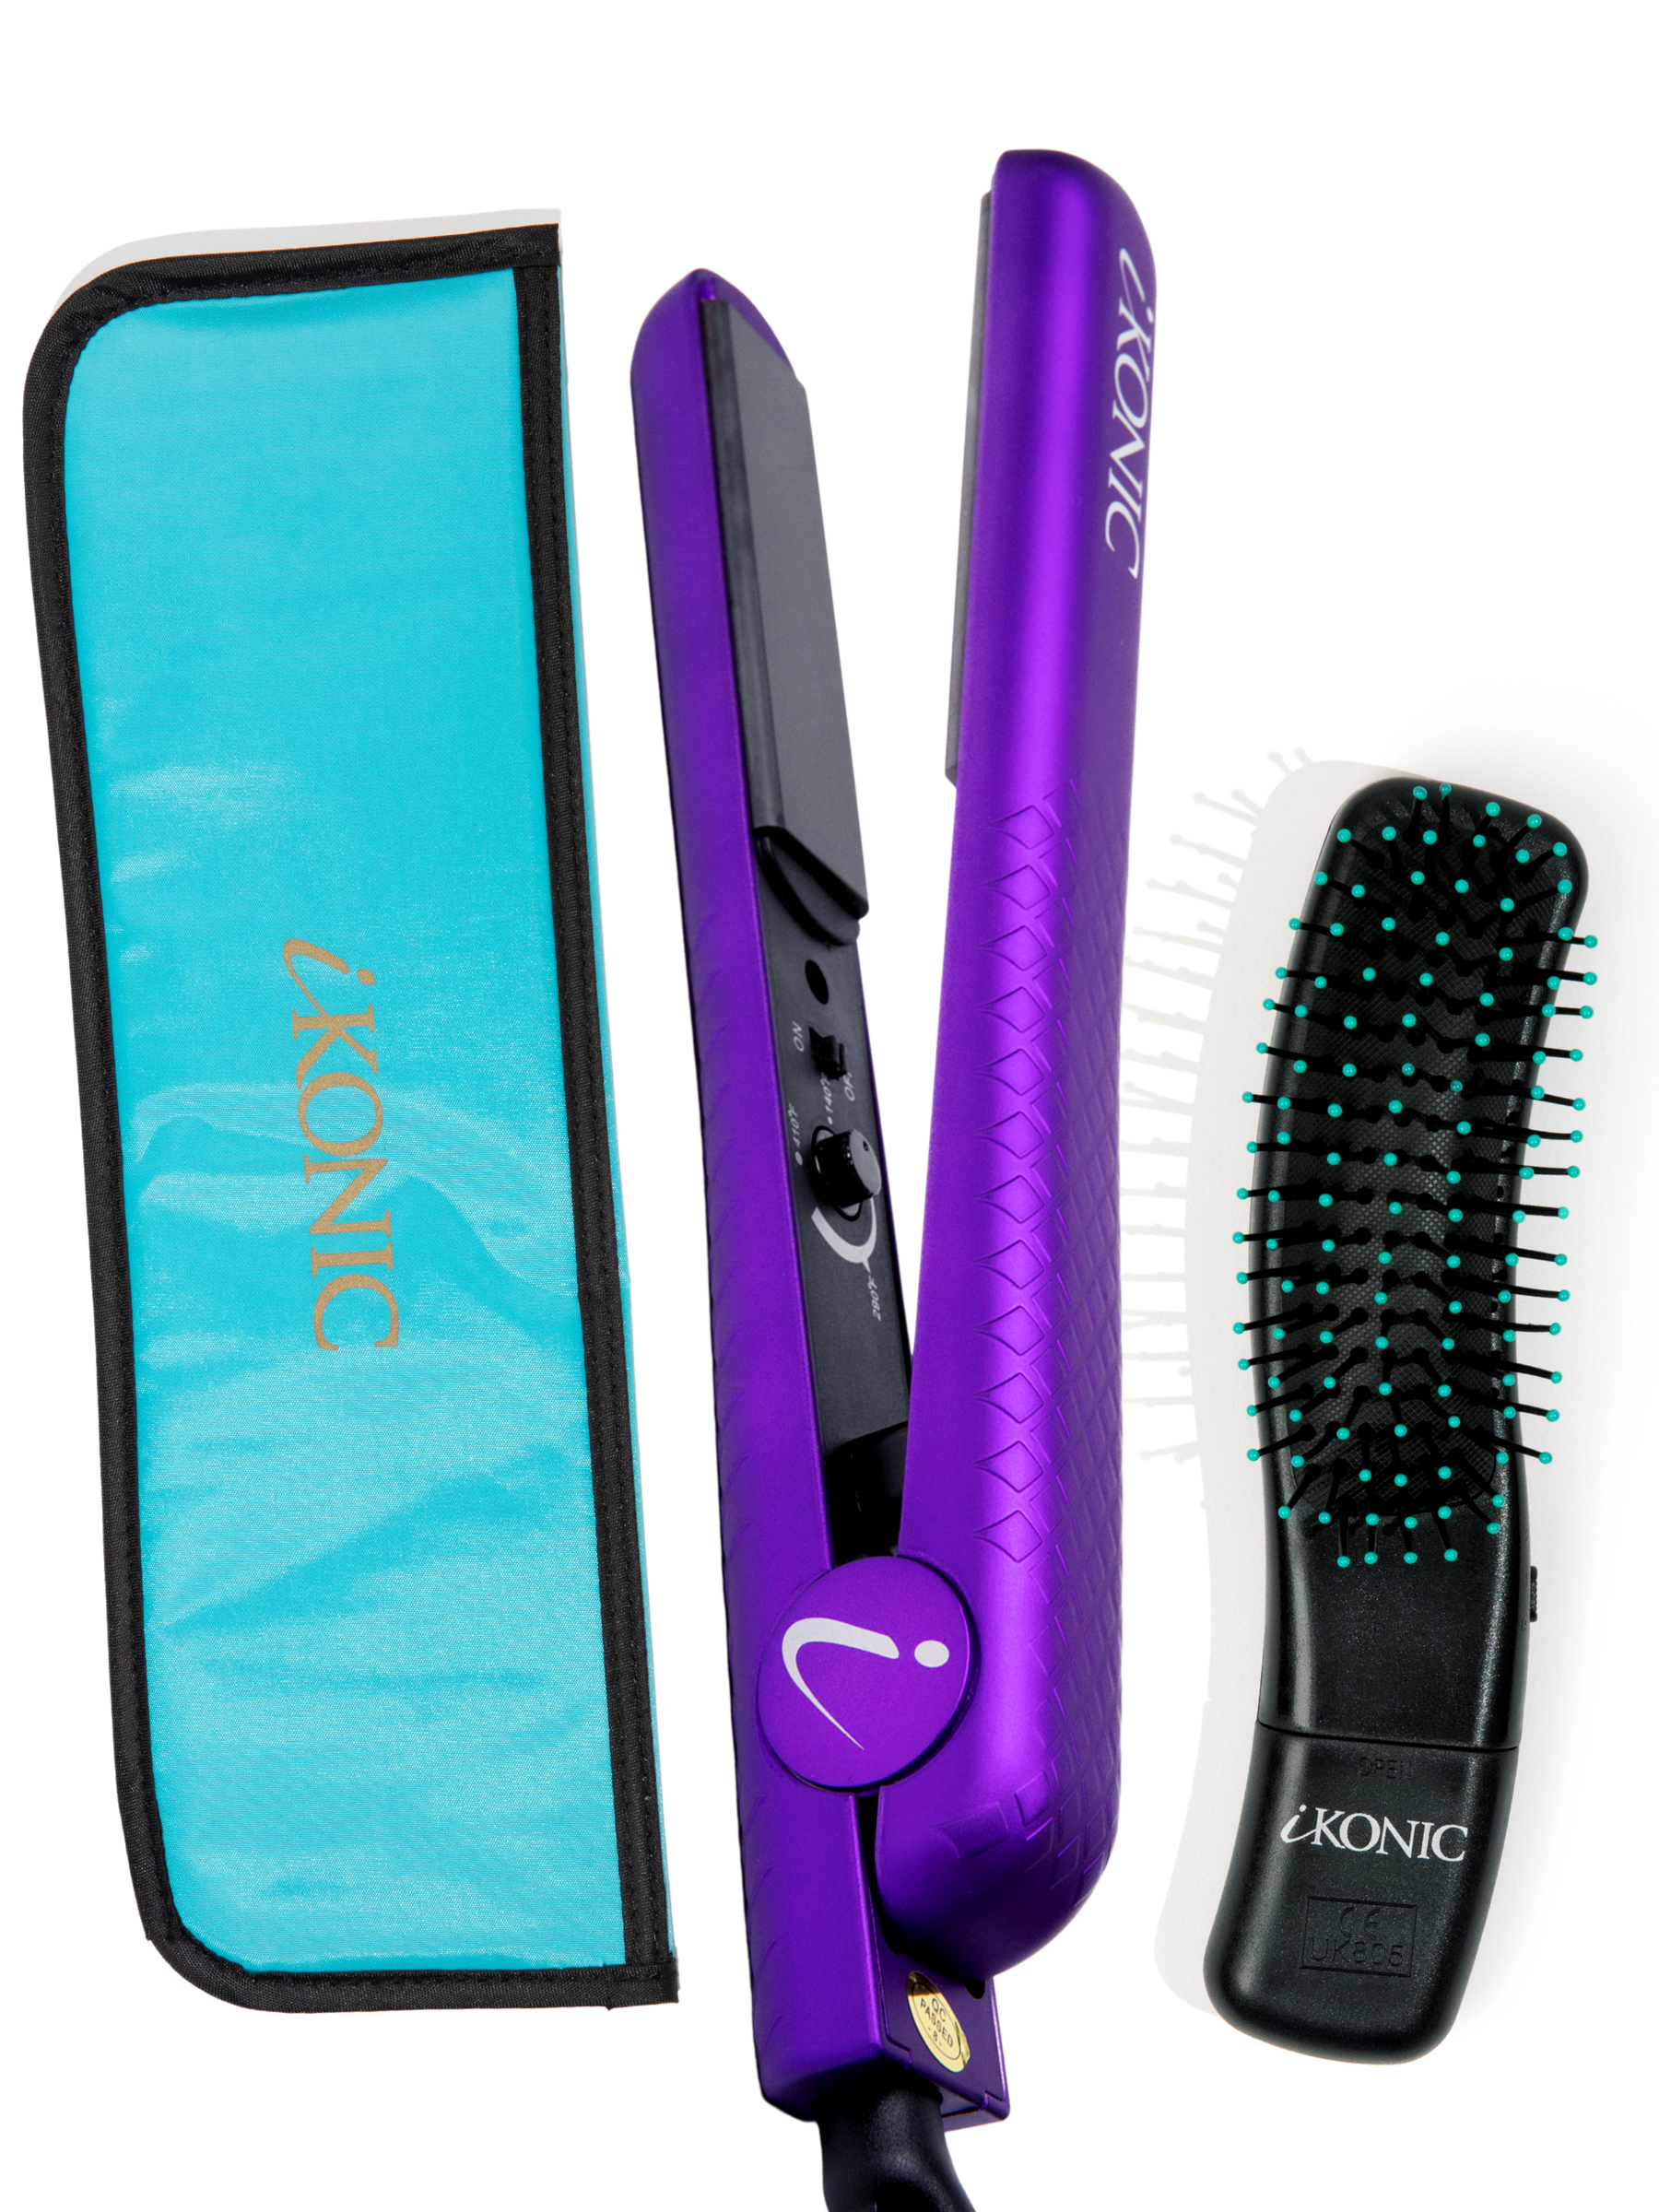 Persona Ceramic Flat Iron With Brush and Pouch Set